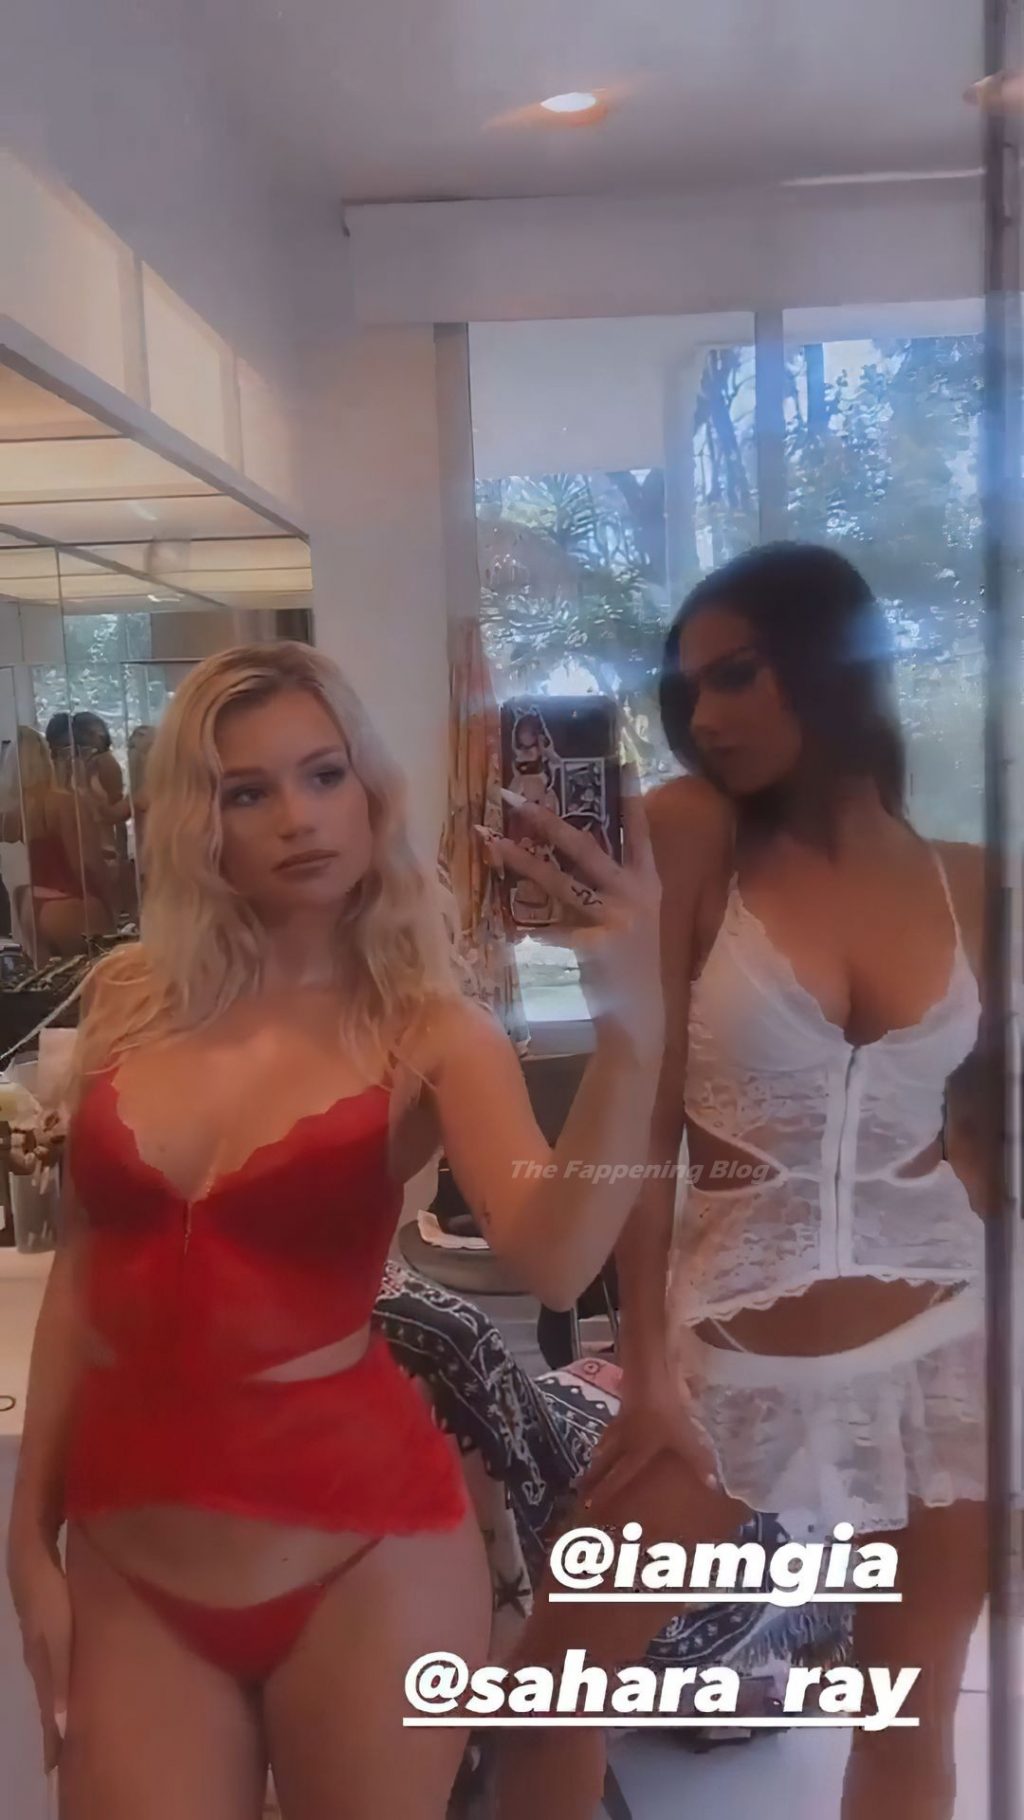 Lottie Moss &amp; Sahara Ray Show Their Tits in Lingerie (14 Pics + Video)